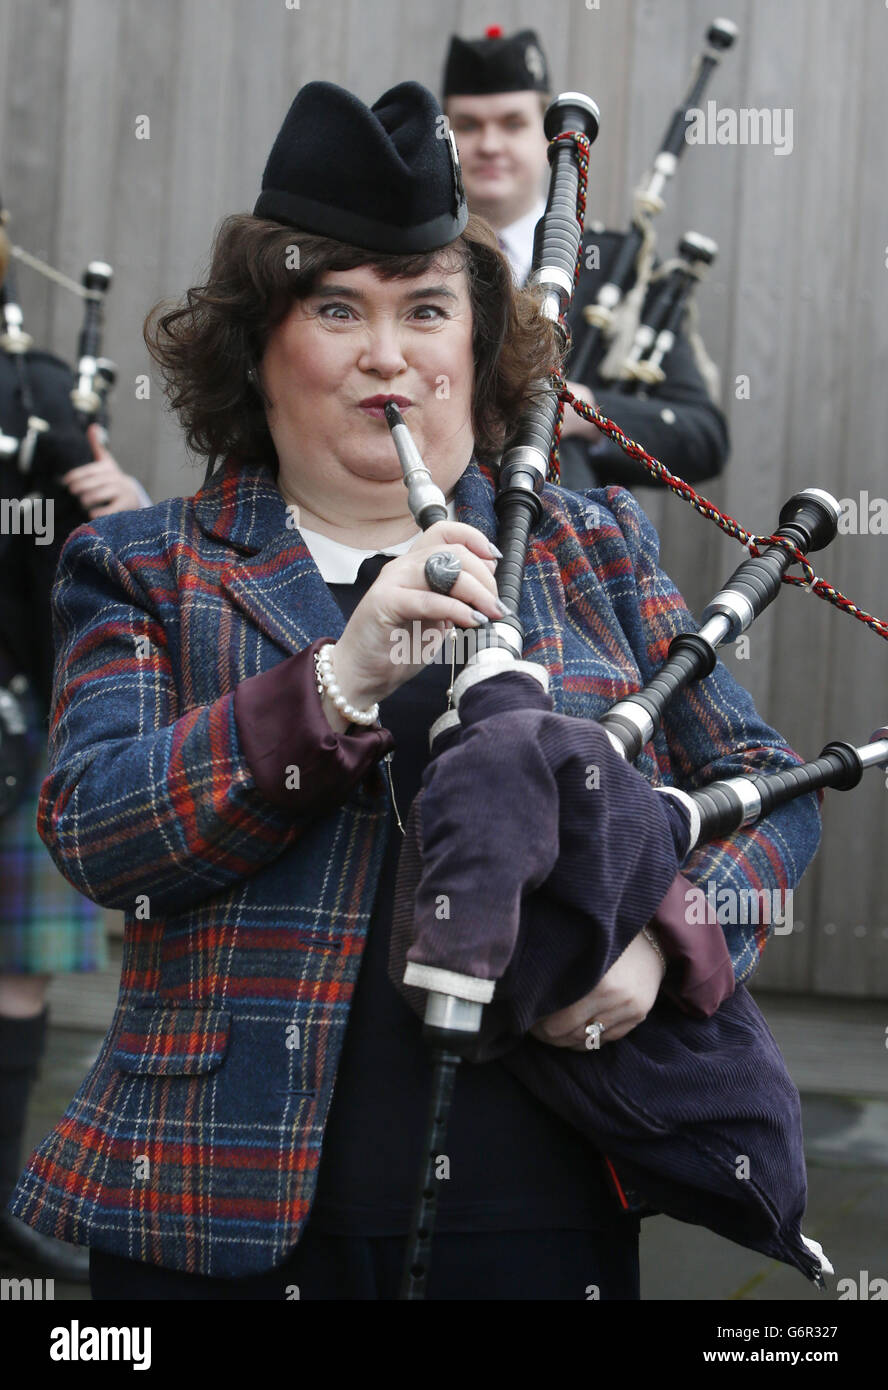 Susan Boyle at pipe band event Stock Photo